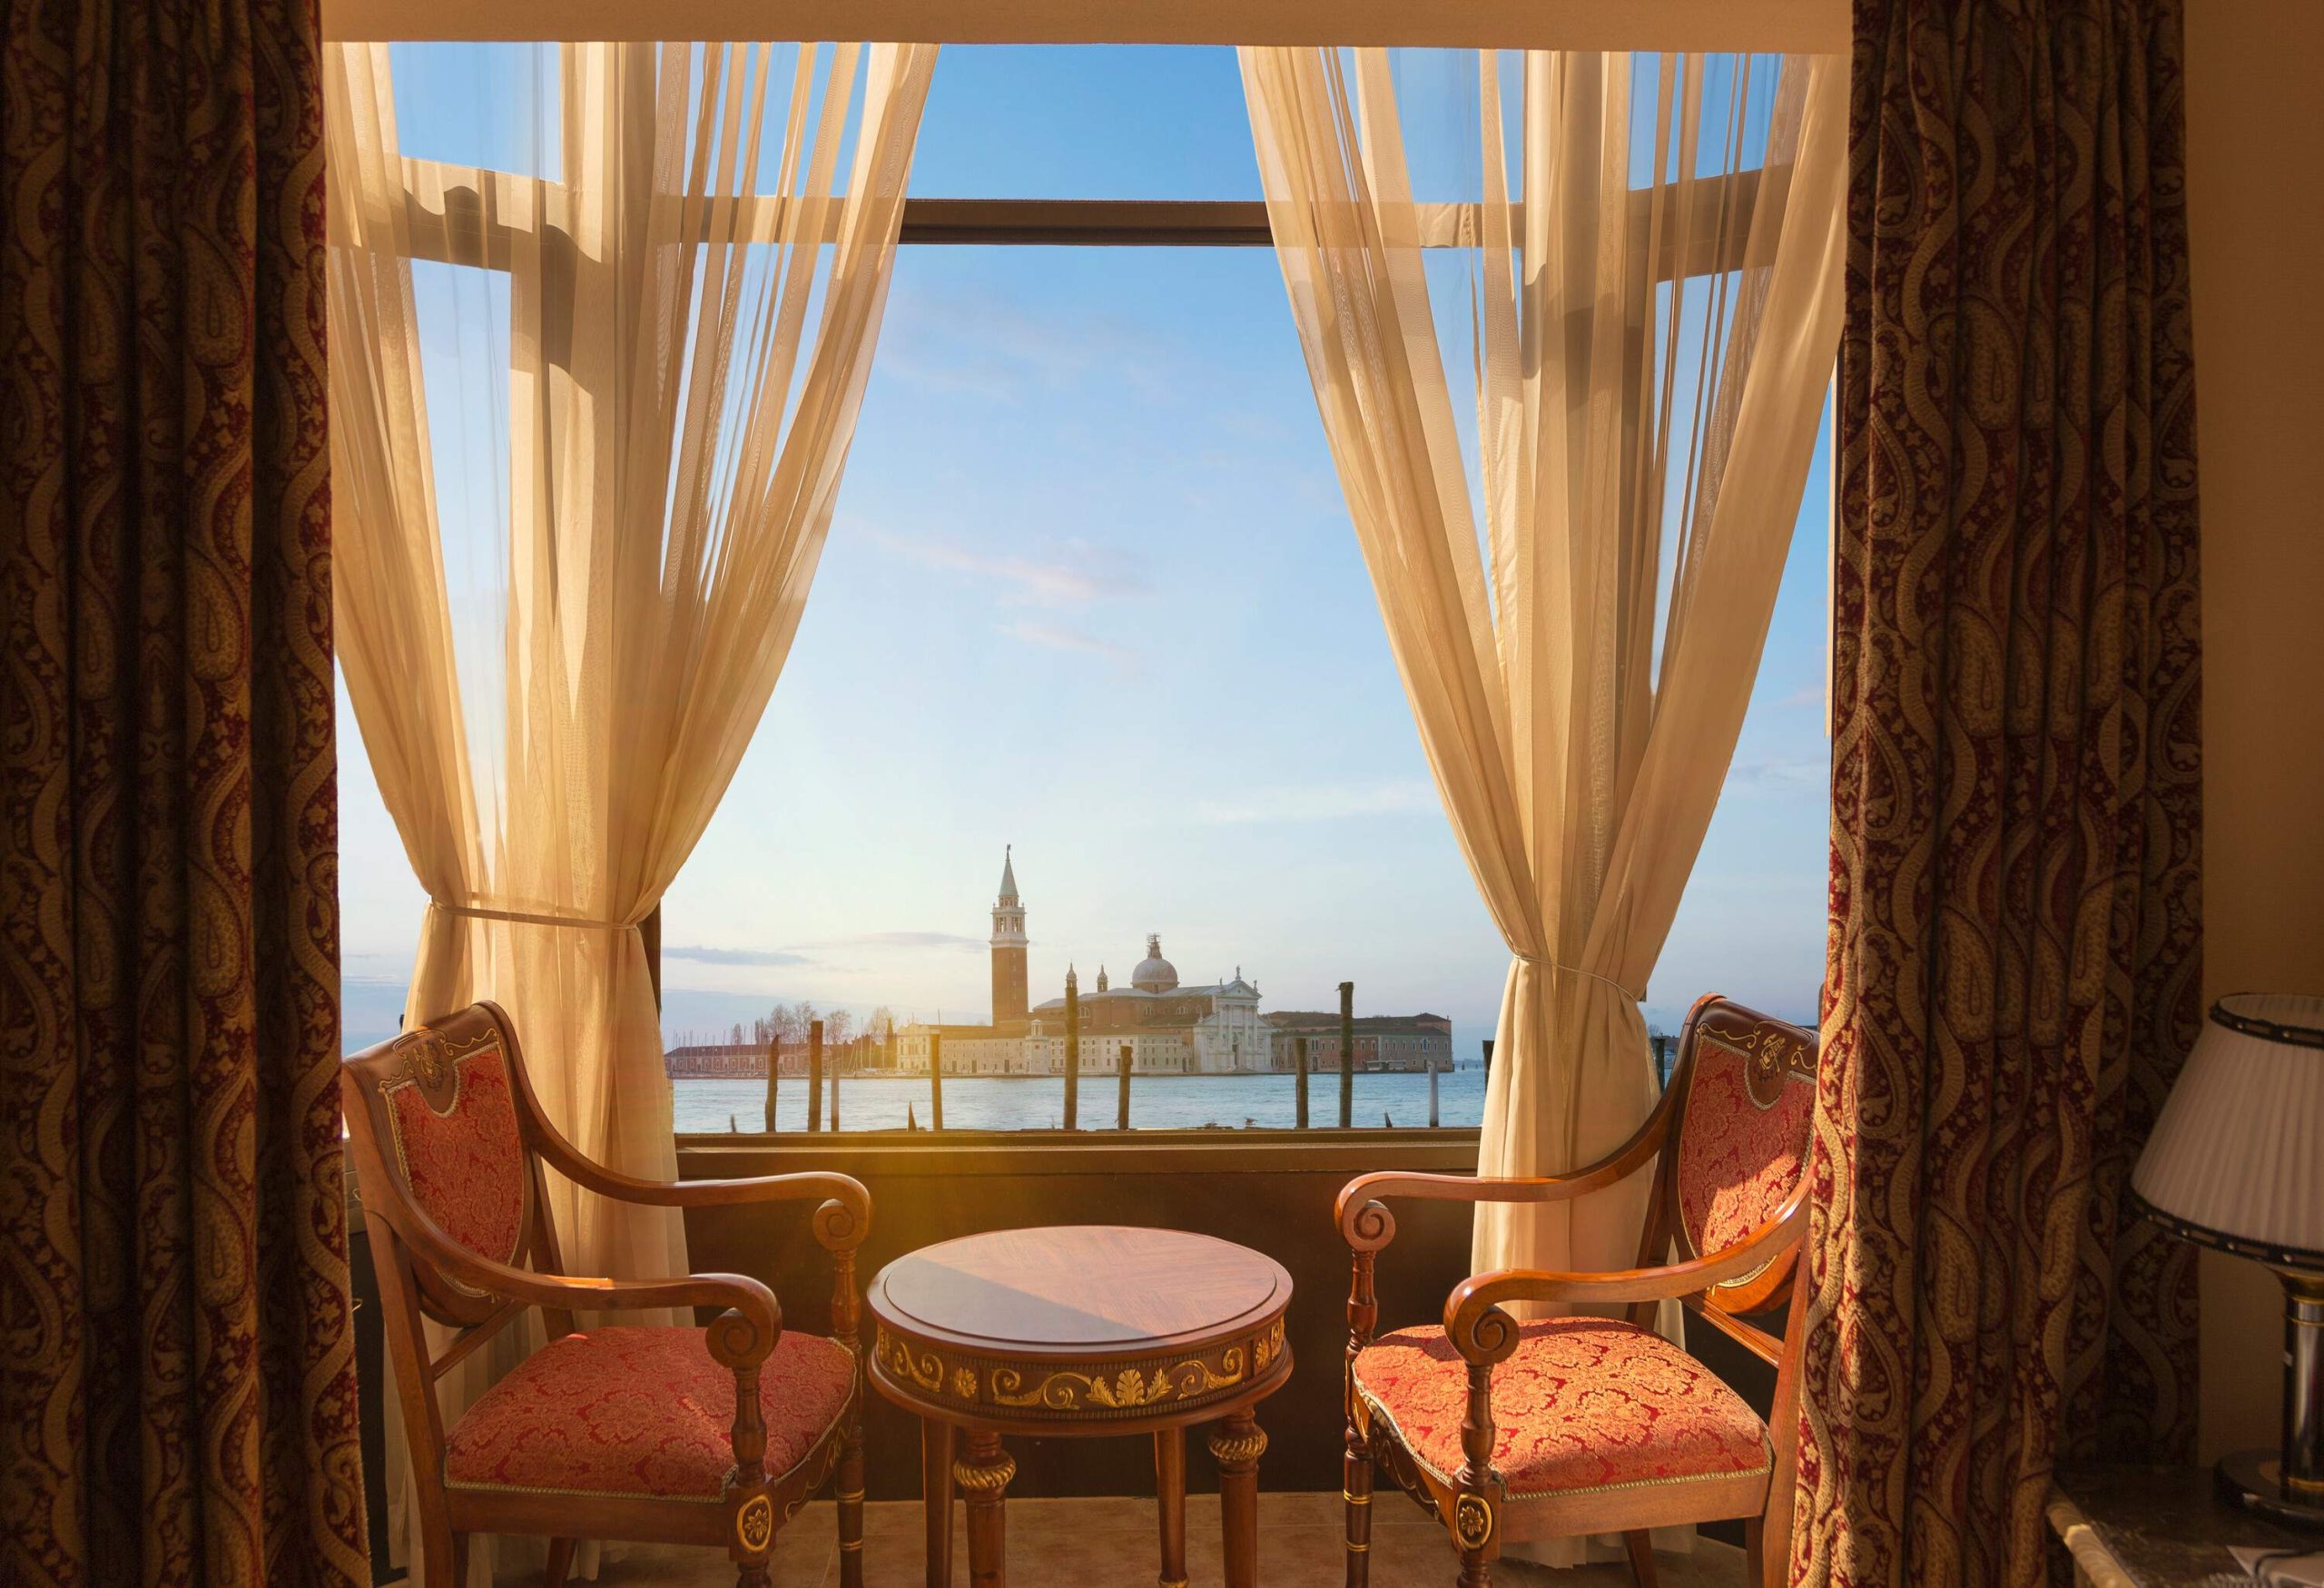 View of Venice laguna from luxury hotel with chairs and curtains in foreground